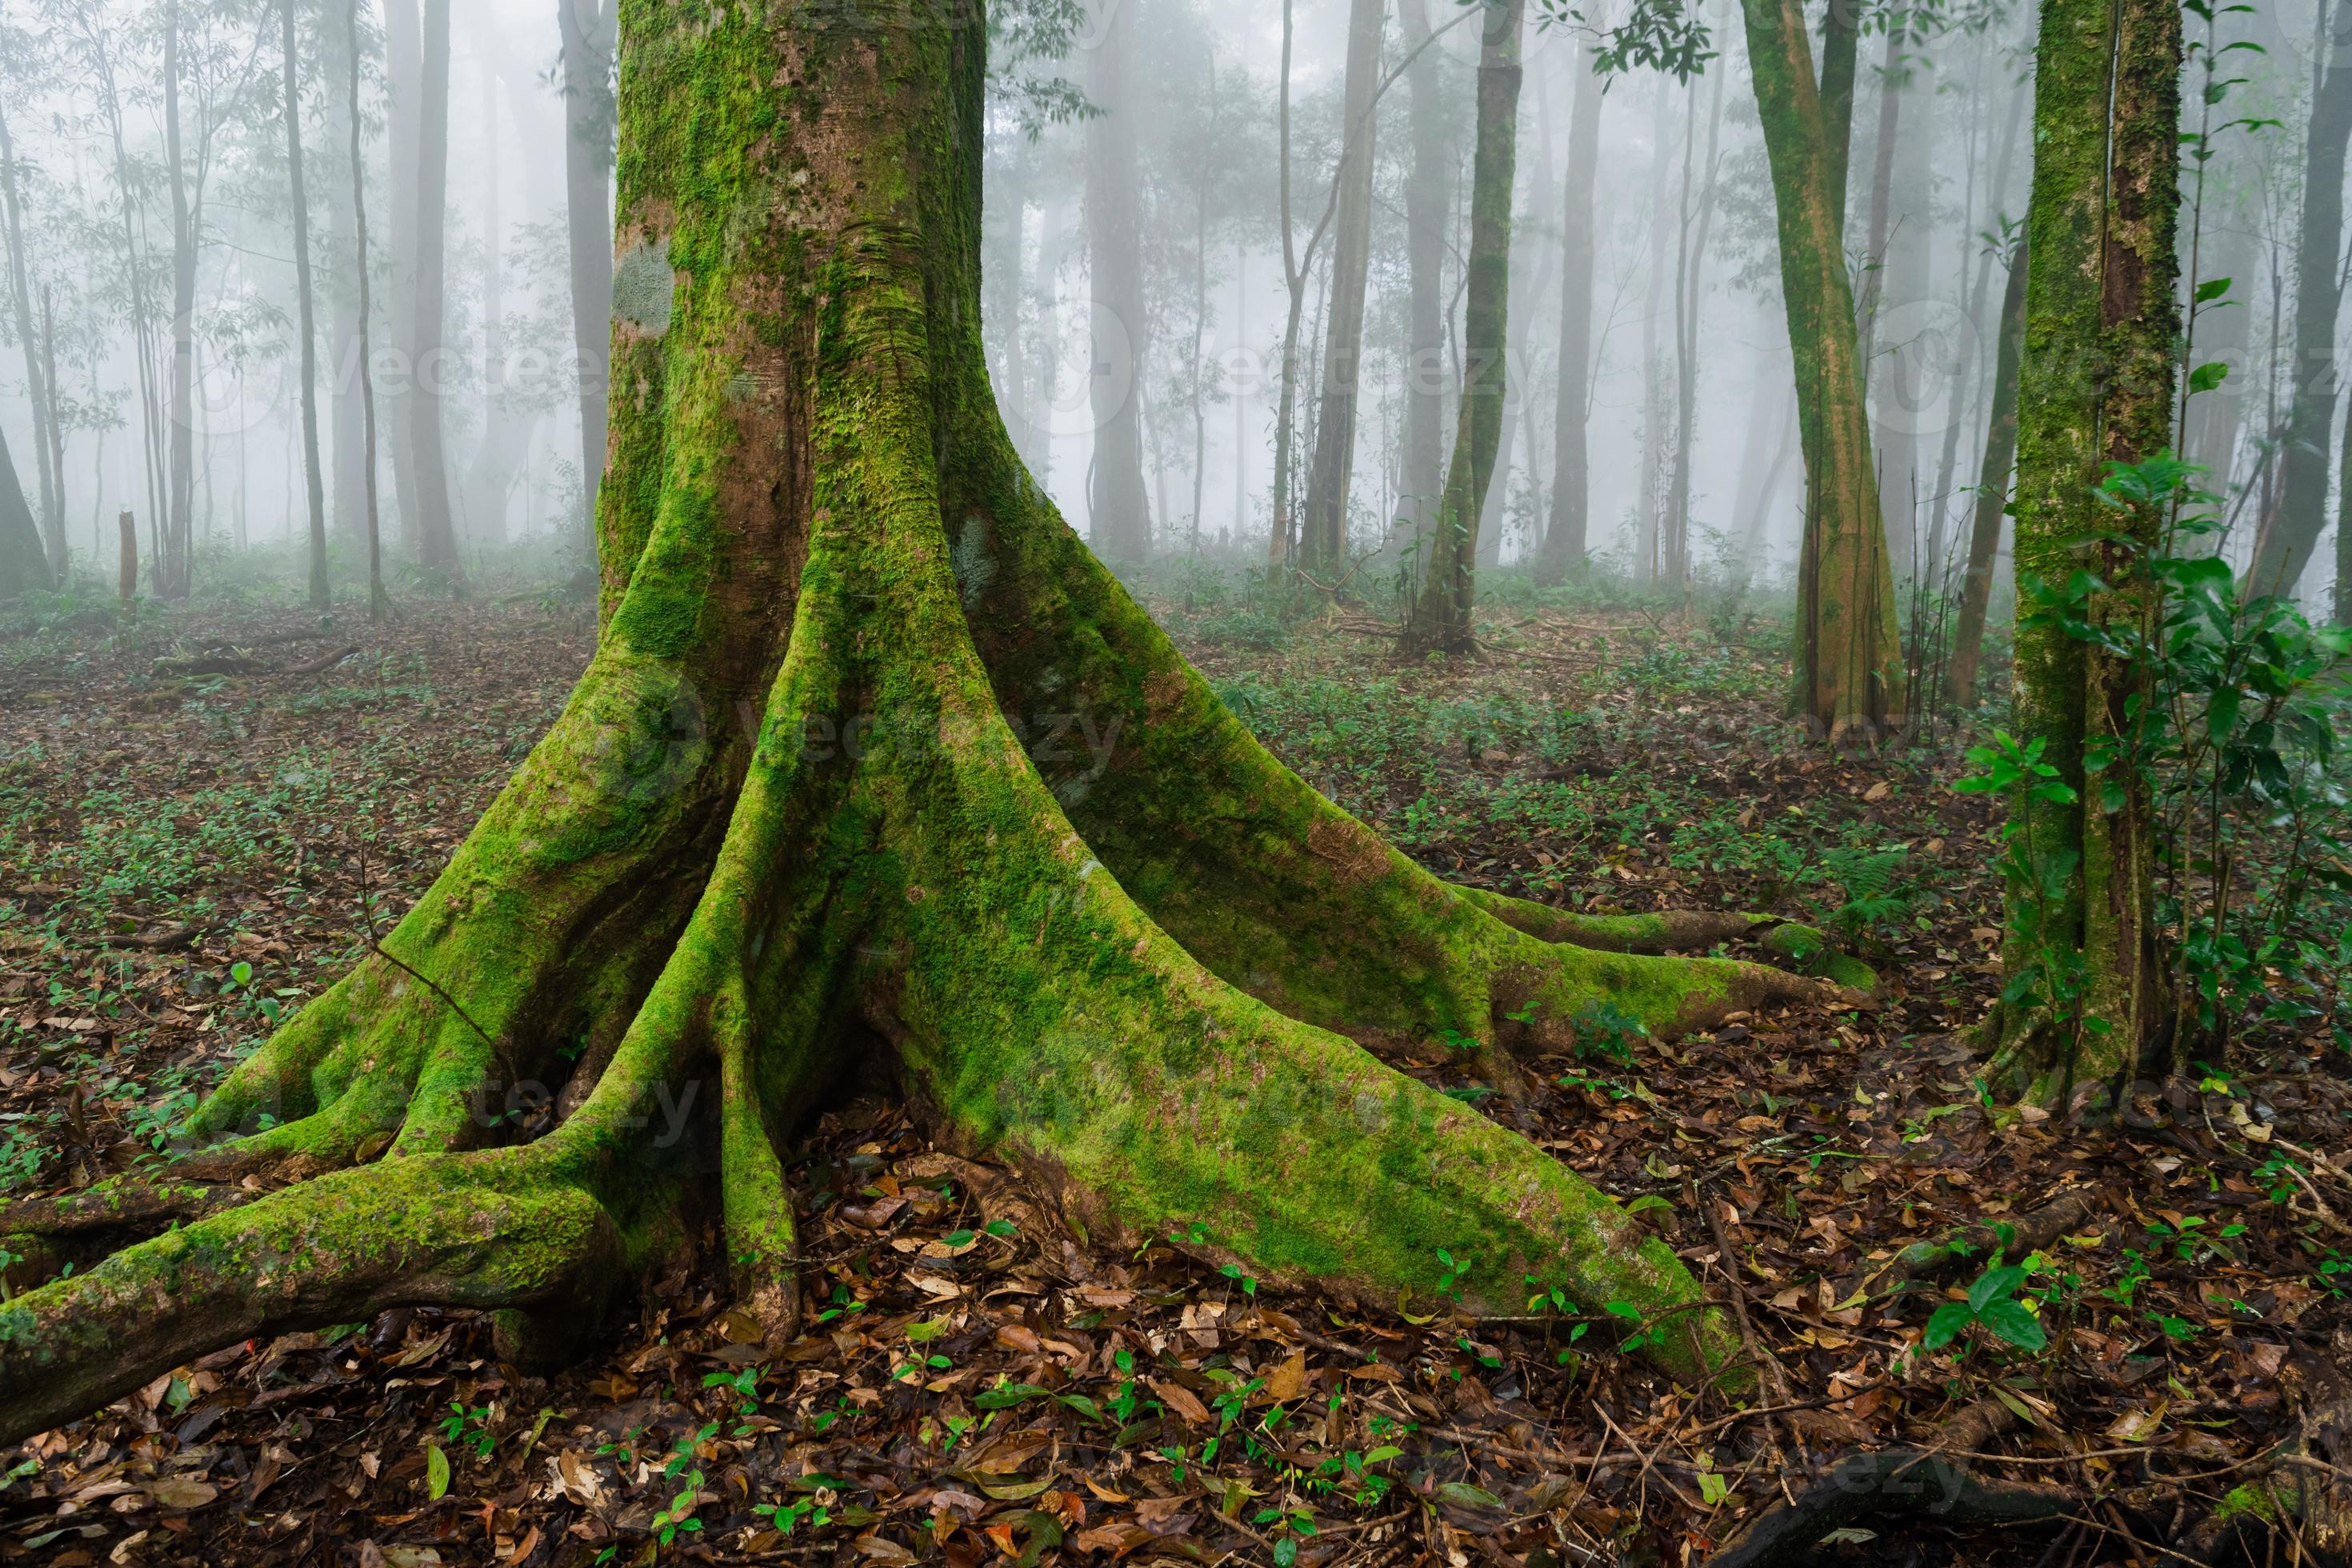 Medium shot of green tree, forest and foggy with tree in the